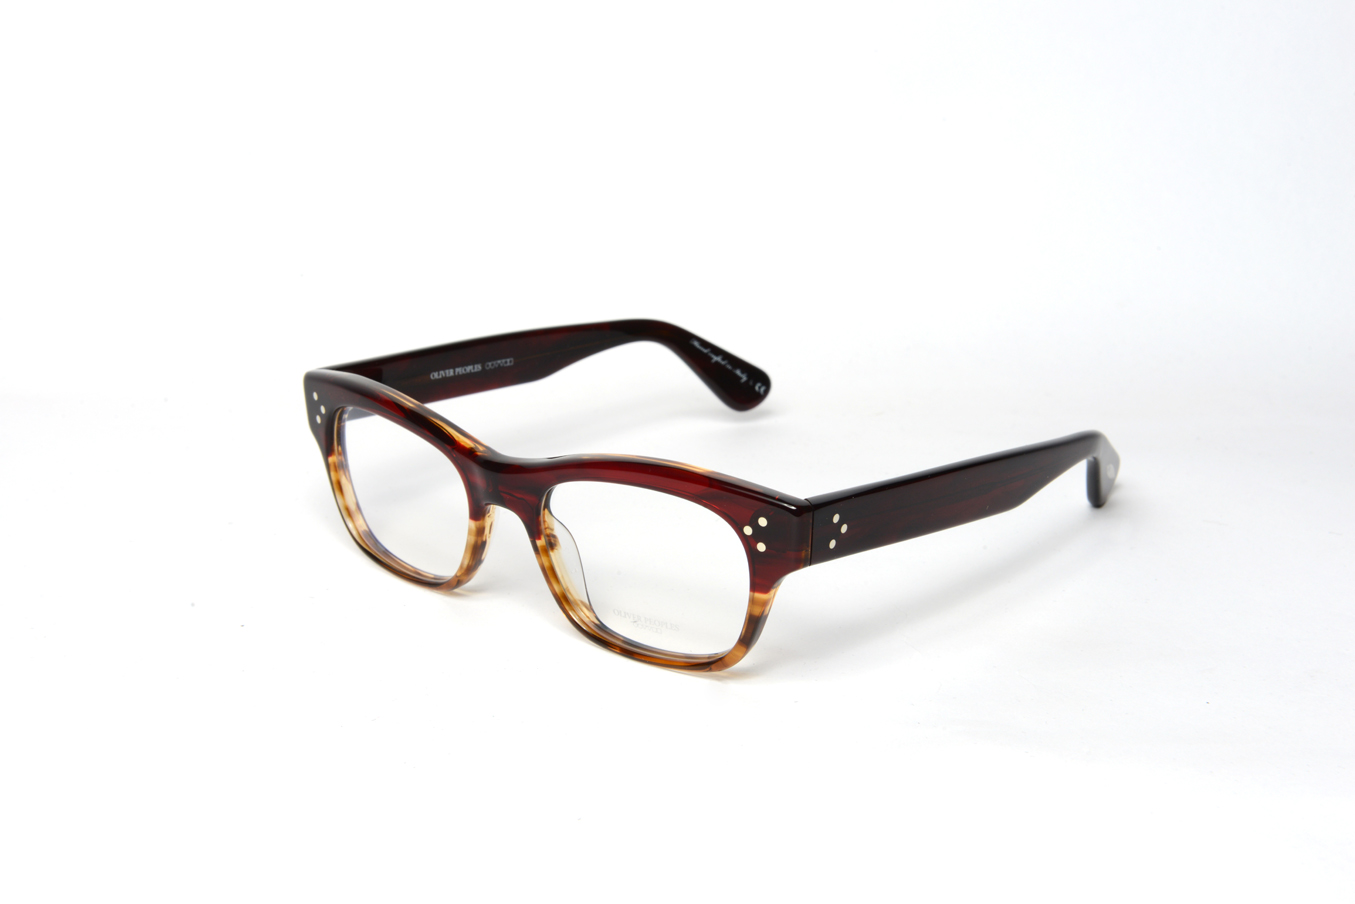 Oliver Peoples - Artie - Piccadilly Opticians Birmingham